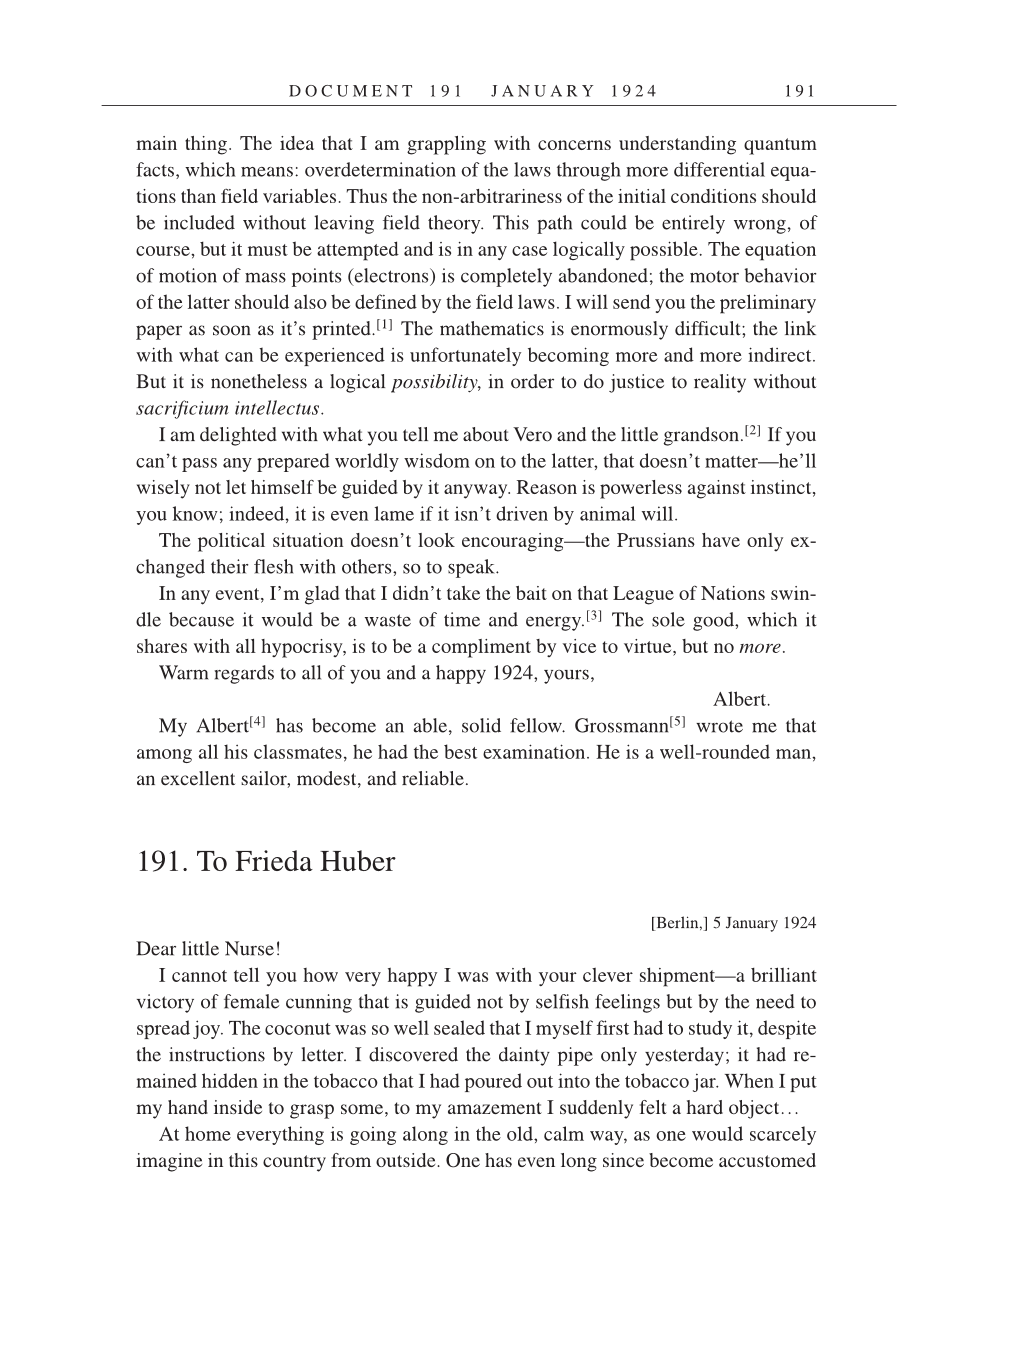 Volume 14: The Berlin Years: Writings & Correspondence, April 1923-May 1925 (English Translation Supplement) page 191